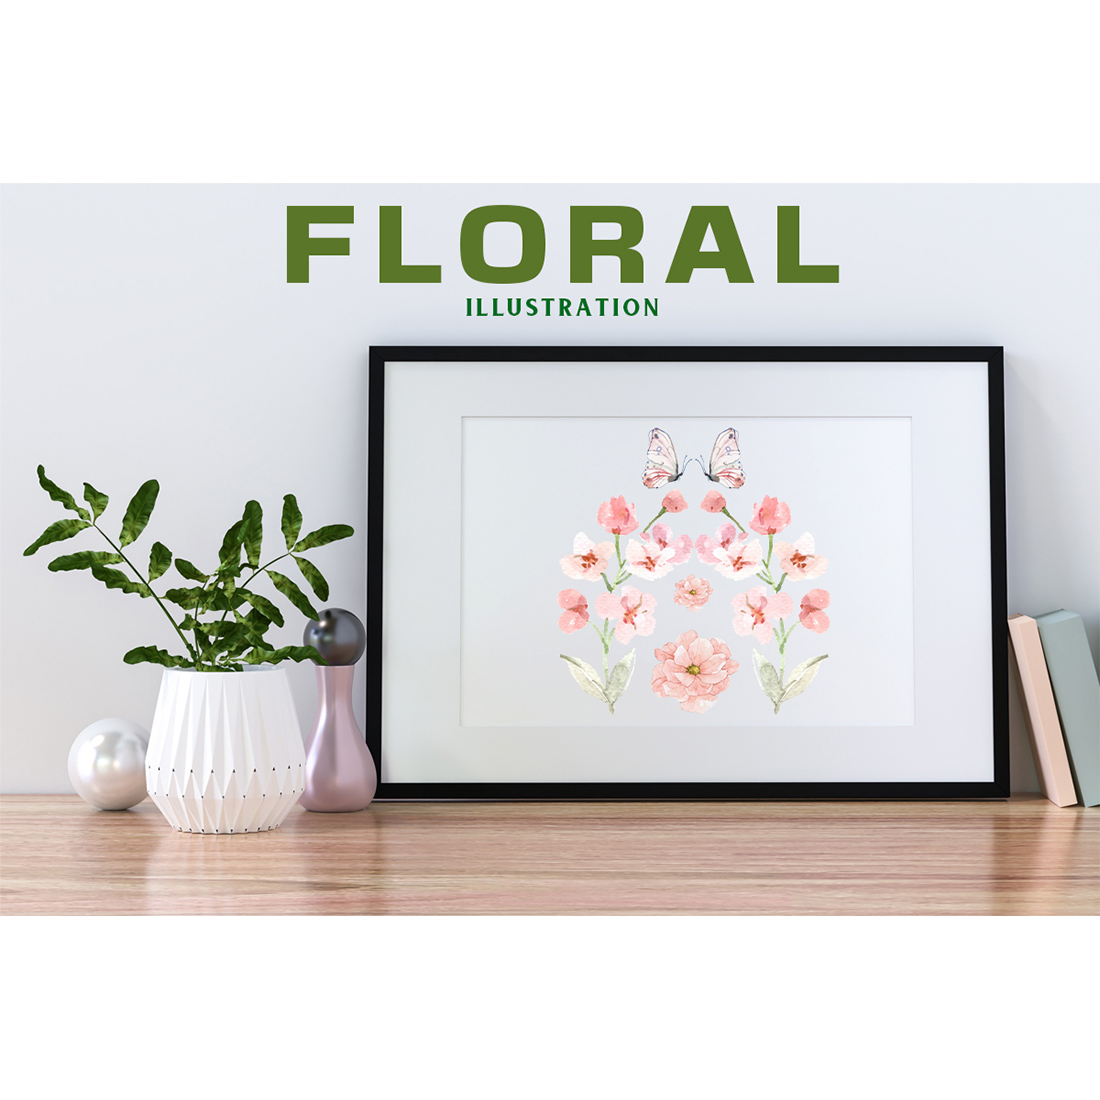 Beautiful image of flowers in a frame